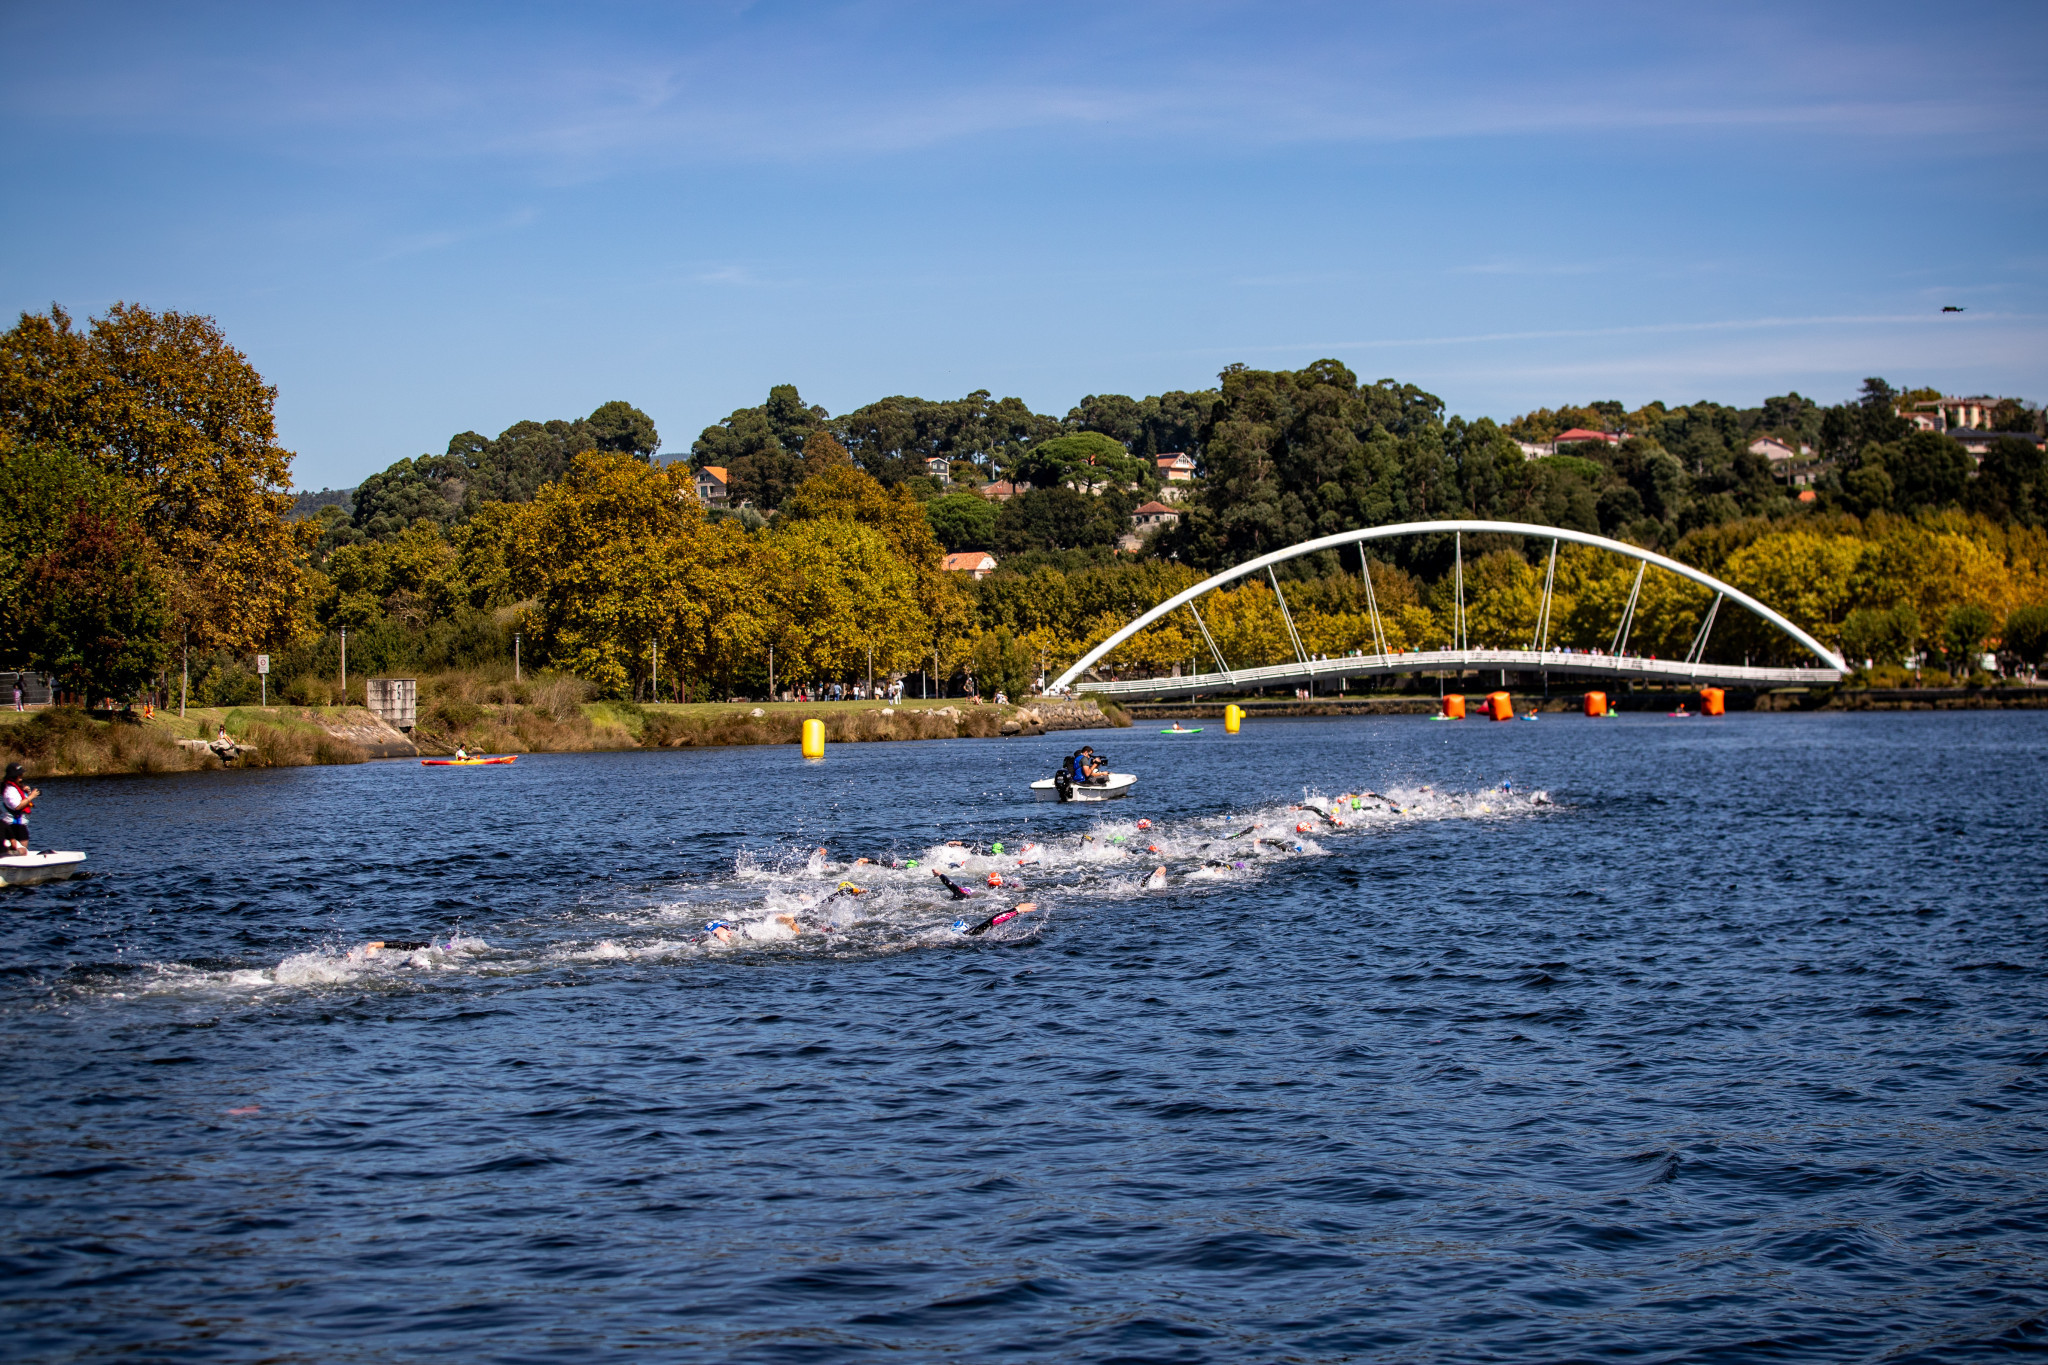 There were glorious conditions for the final day of competition in Pontevedra at the World Triathlon Championship Finals ©World Triathlon